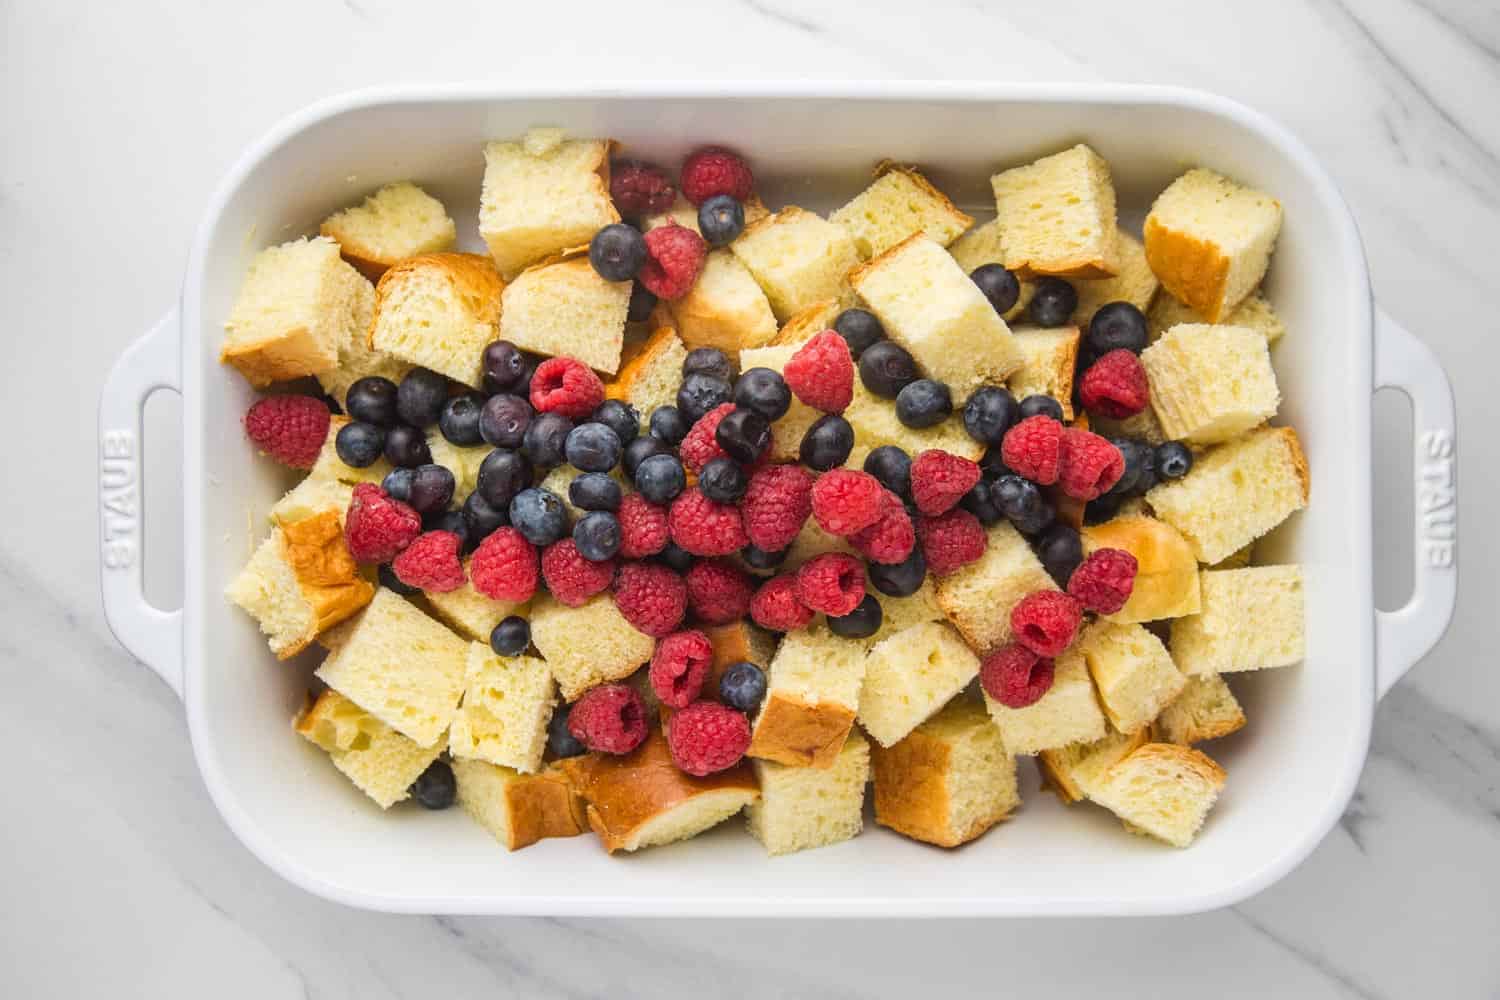 Overhead shot of a white baking dish filled with pieces of bread and fresh raspberries and blueberries